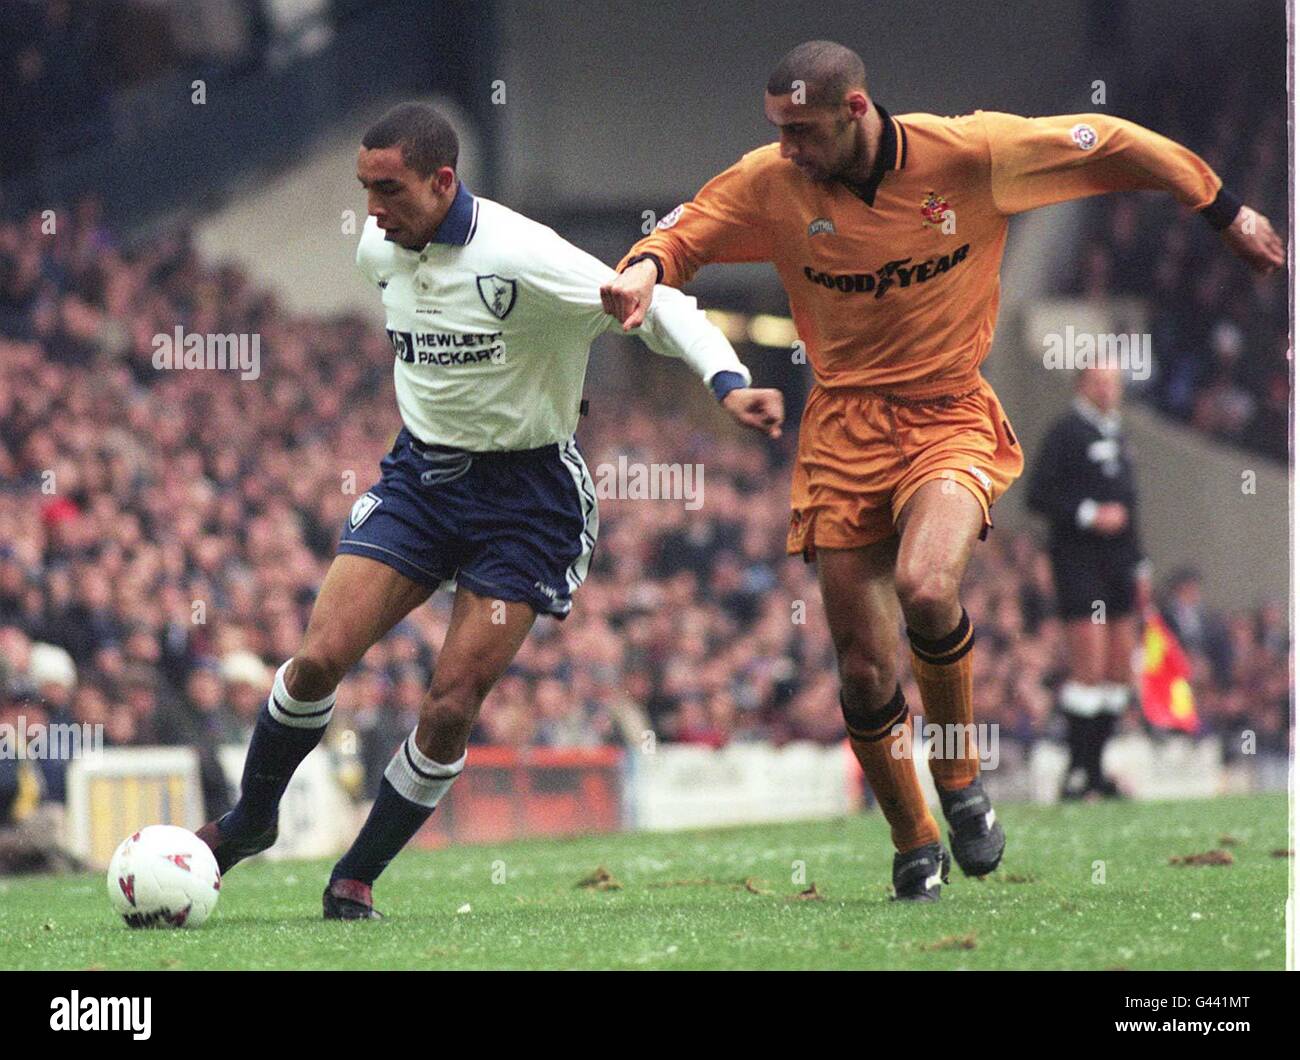 Tottenham's Chris Armstrong holds off Wolves Dean Richards during today's (Saturday) FA Cup 4th round clash at White Hart Lane. Photo by Christine Boyd. Stock Photo